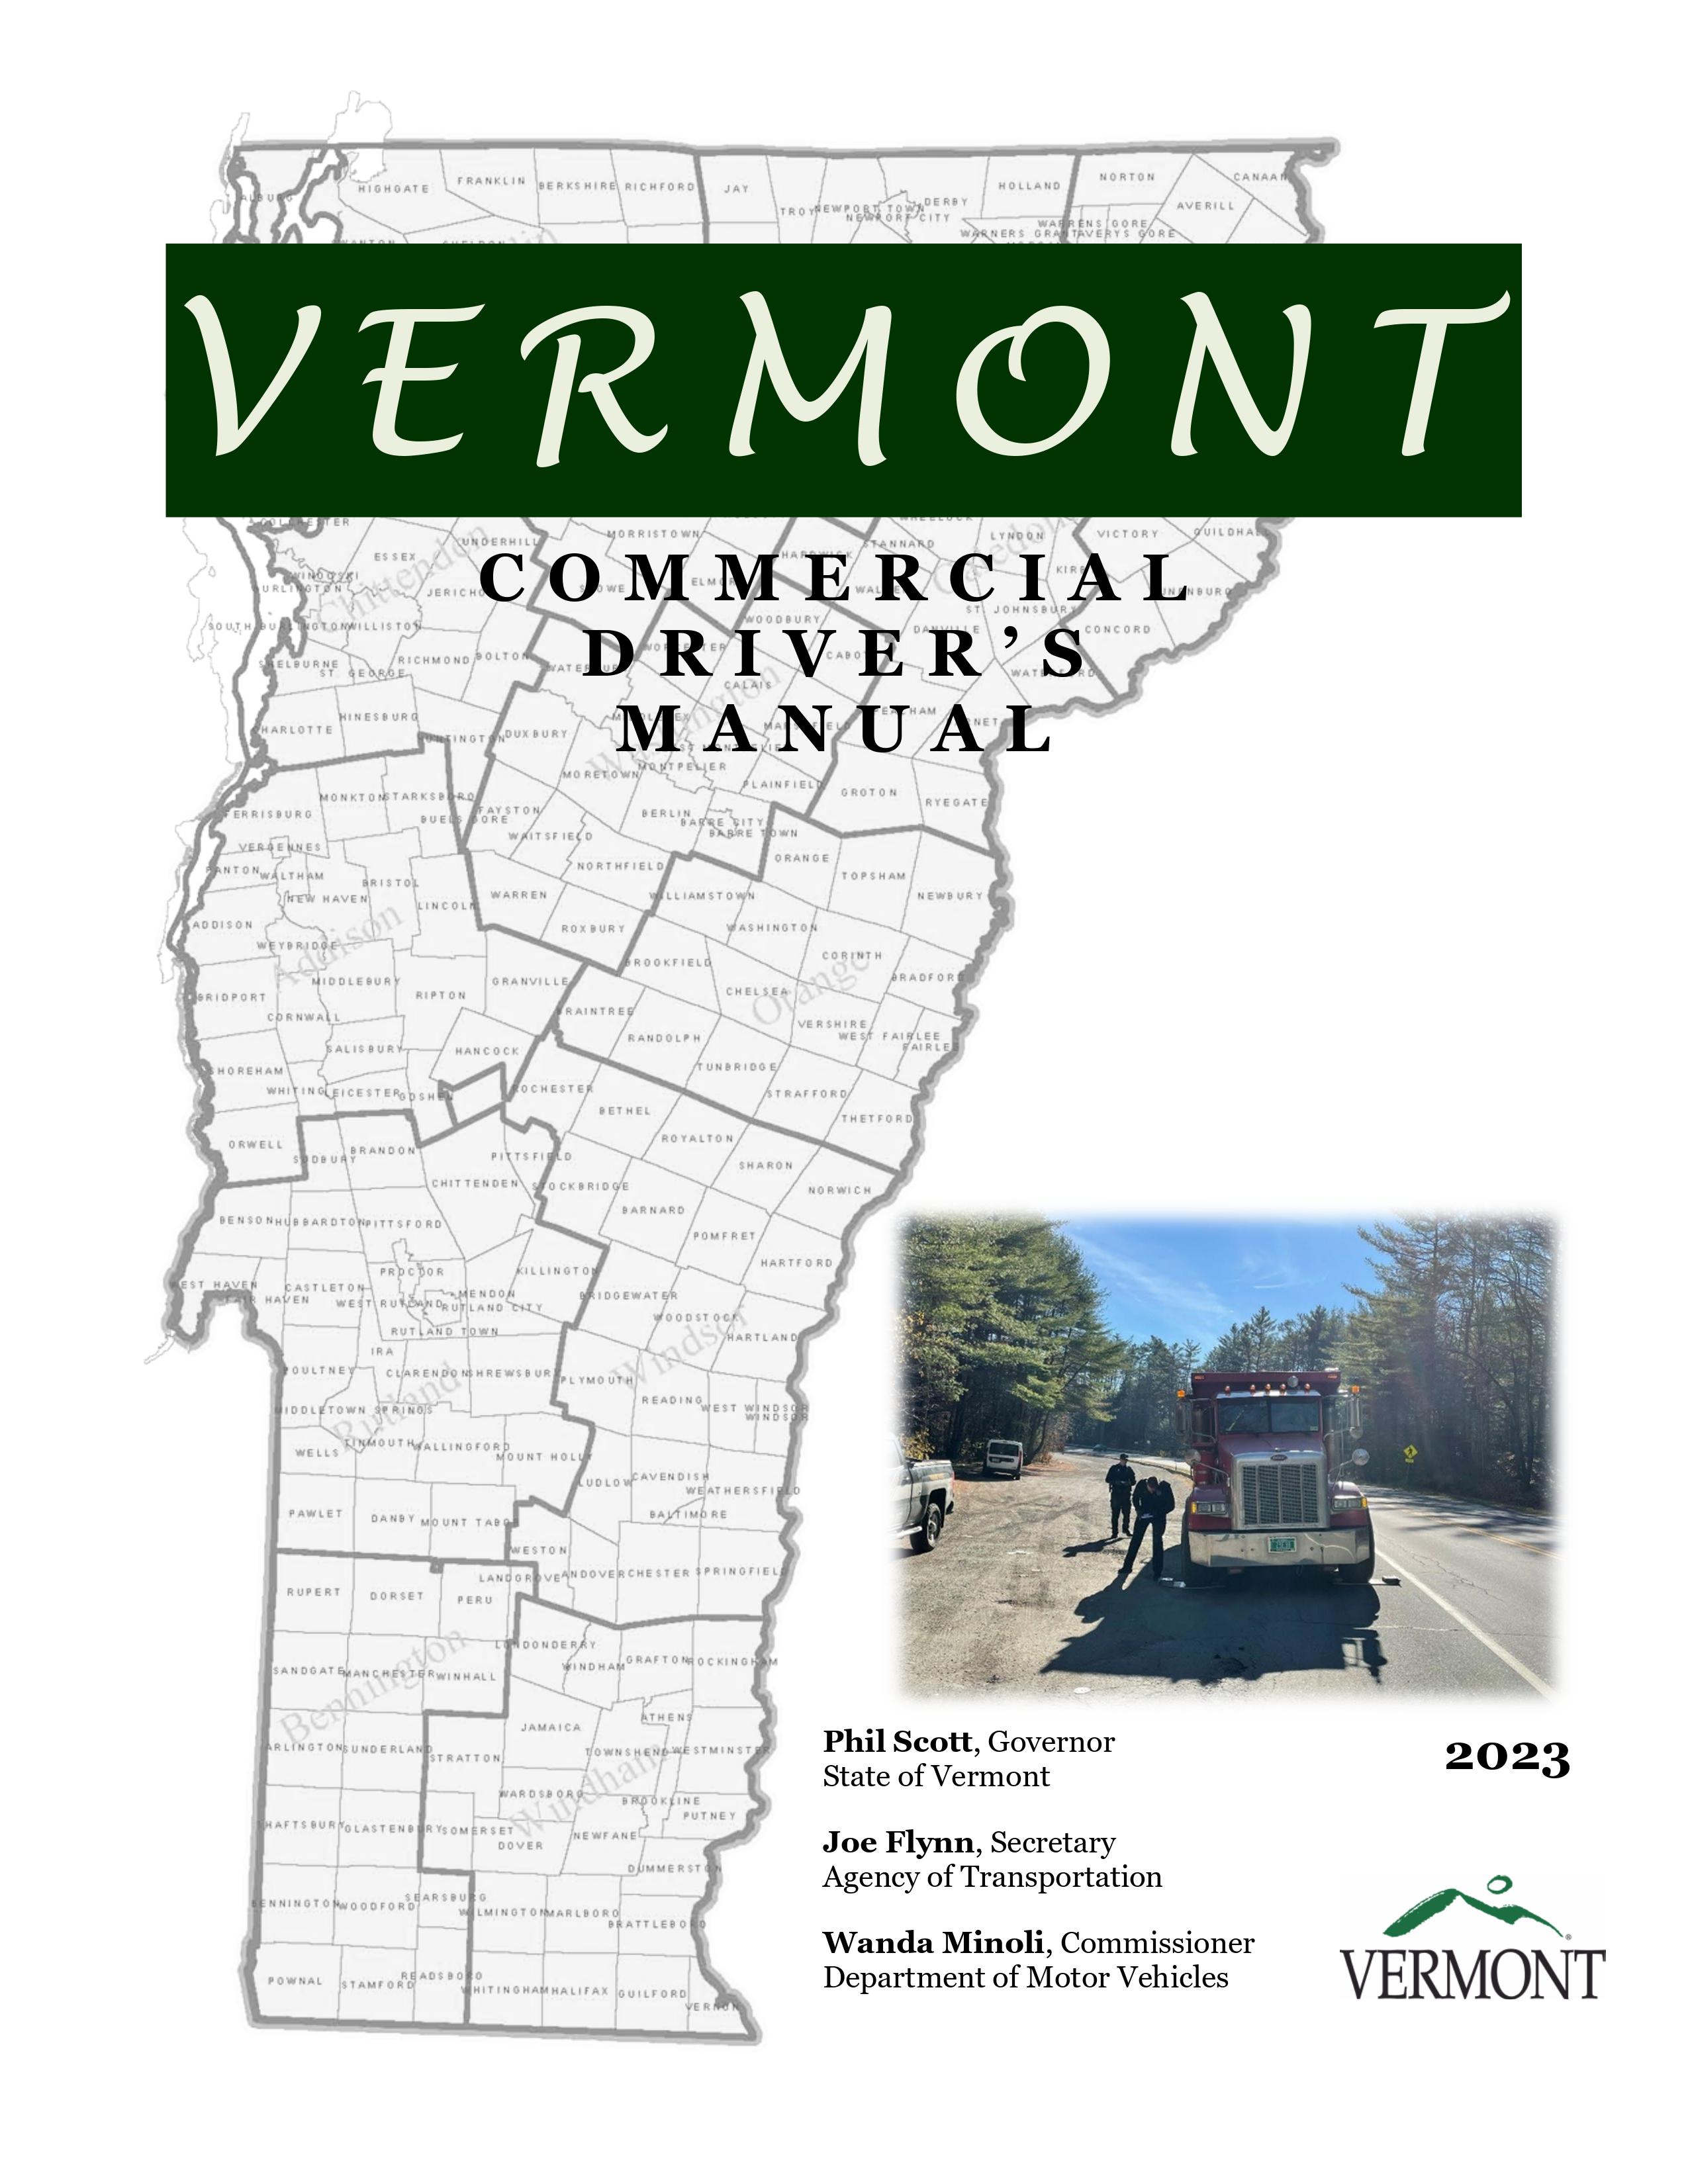 Vermont's CDL Manual